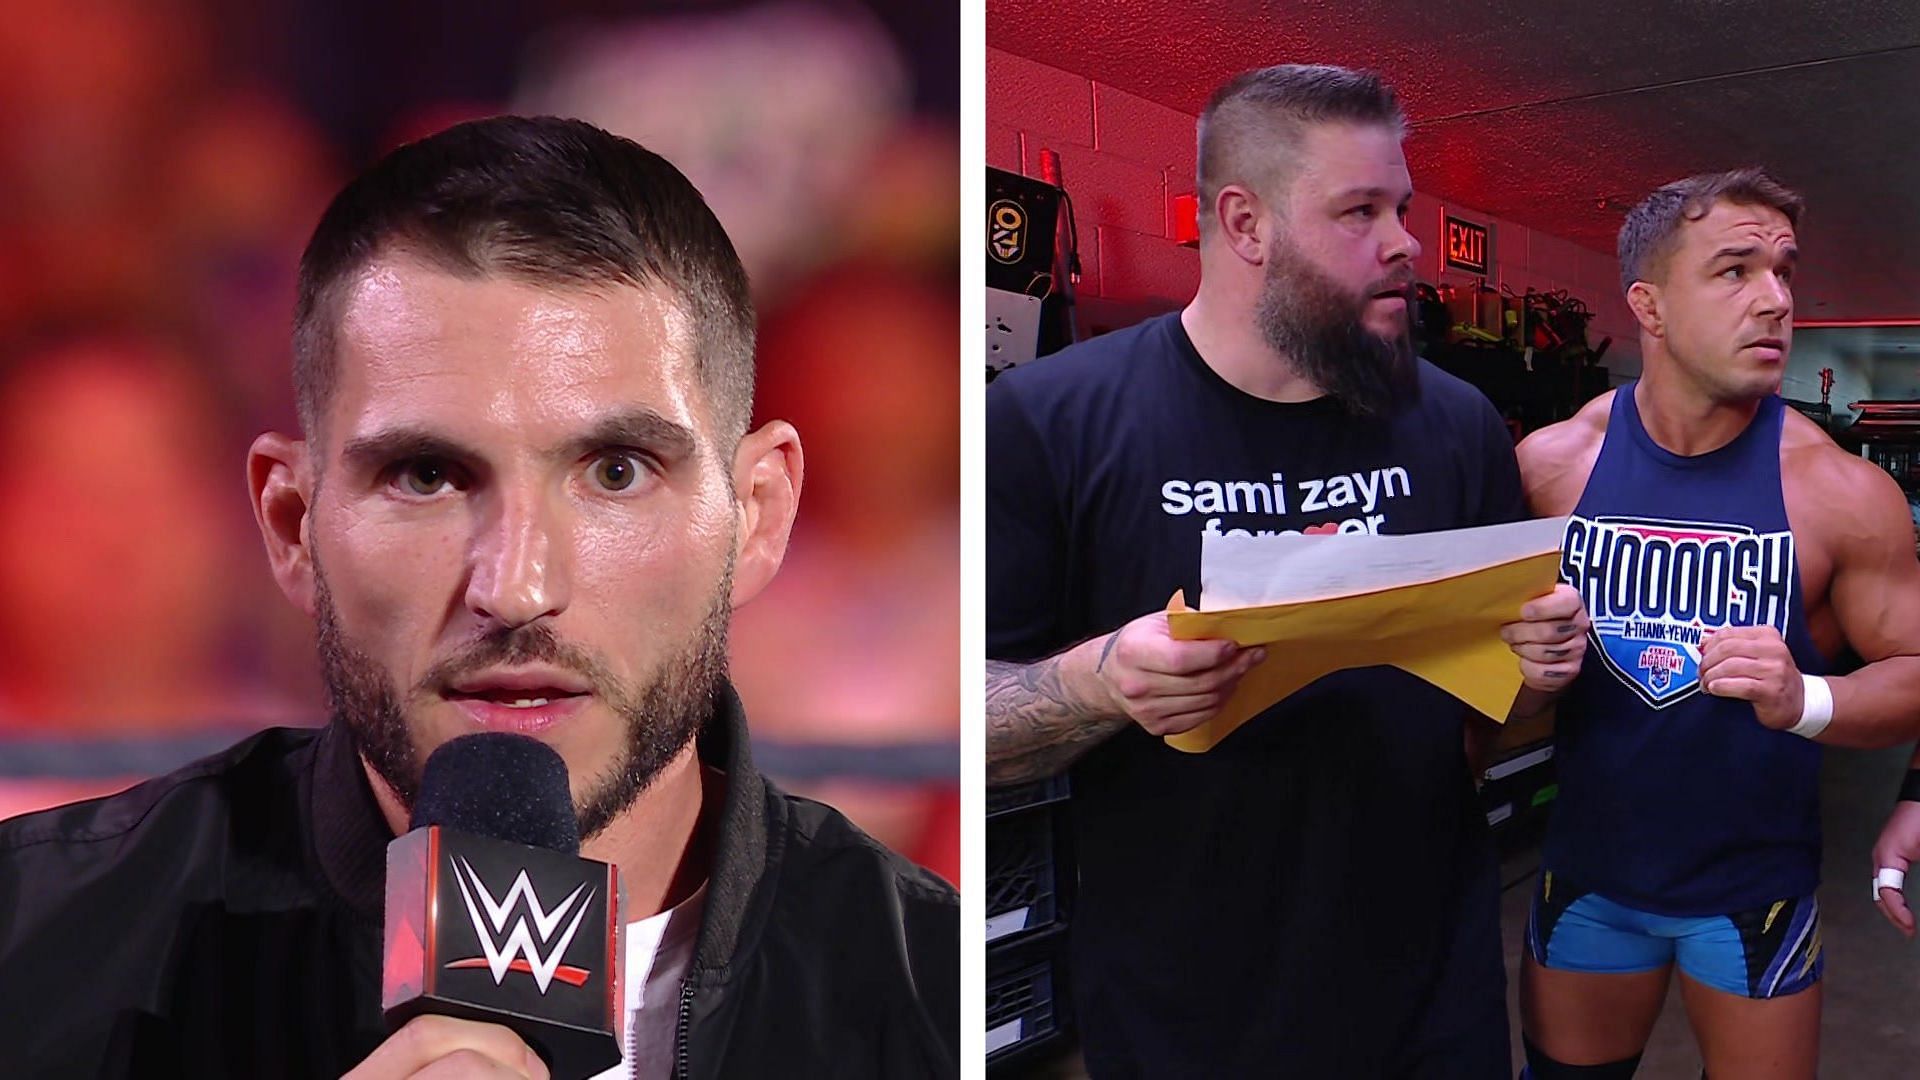 Johnny Gargano and Kevin Owens will take on Alpha Academy on WWE RAW